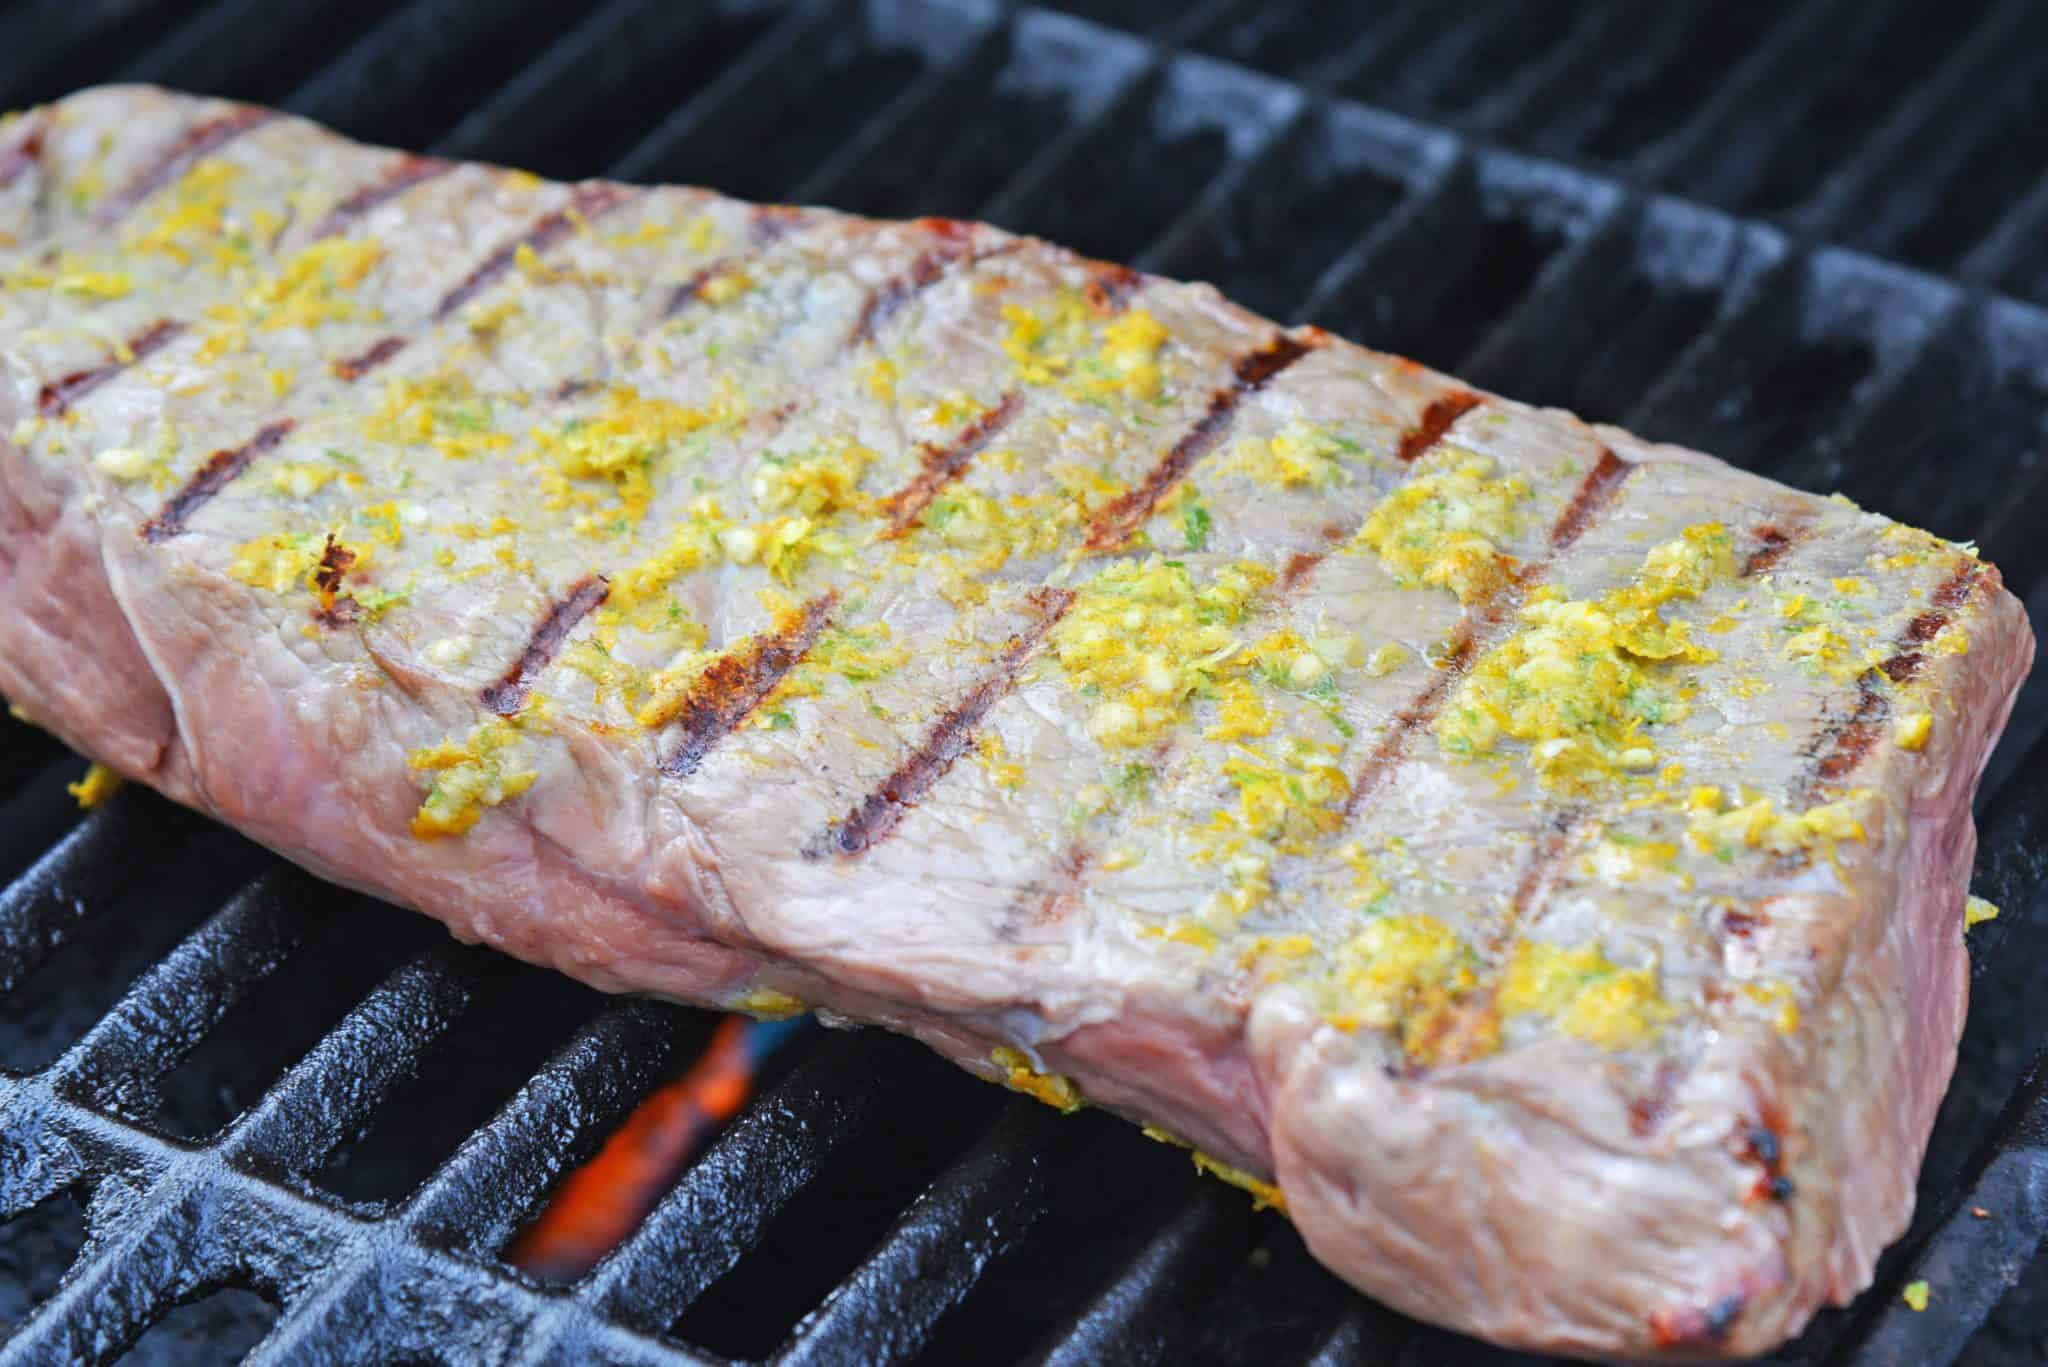 Citrus Steak Rub makes the best steak seasoning! With lemon, lime and orange zests, this is a dry rub that you will use over and over again. #steakdryrub #steakseasoning #beststeakdryrub www.savoryexperiments.com